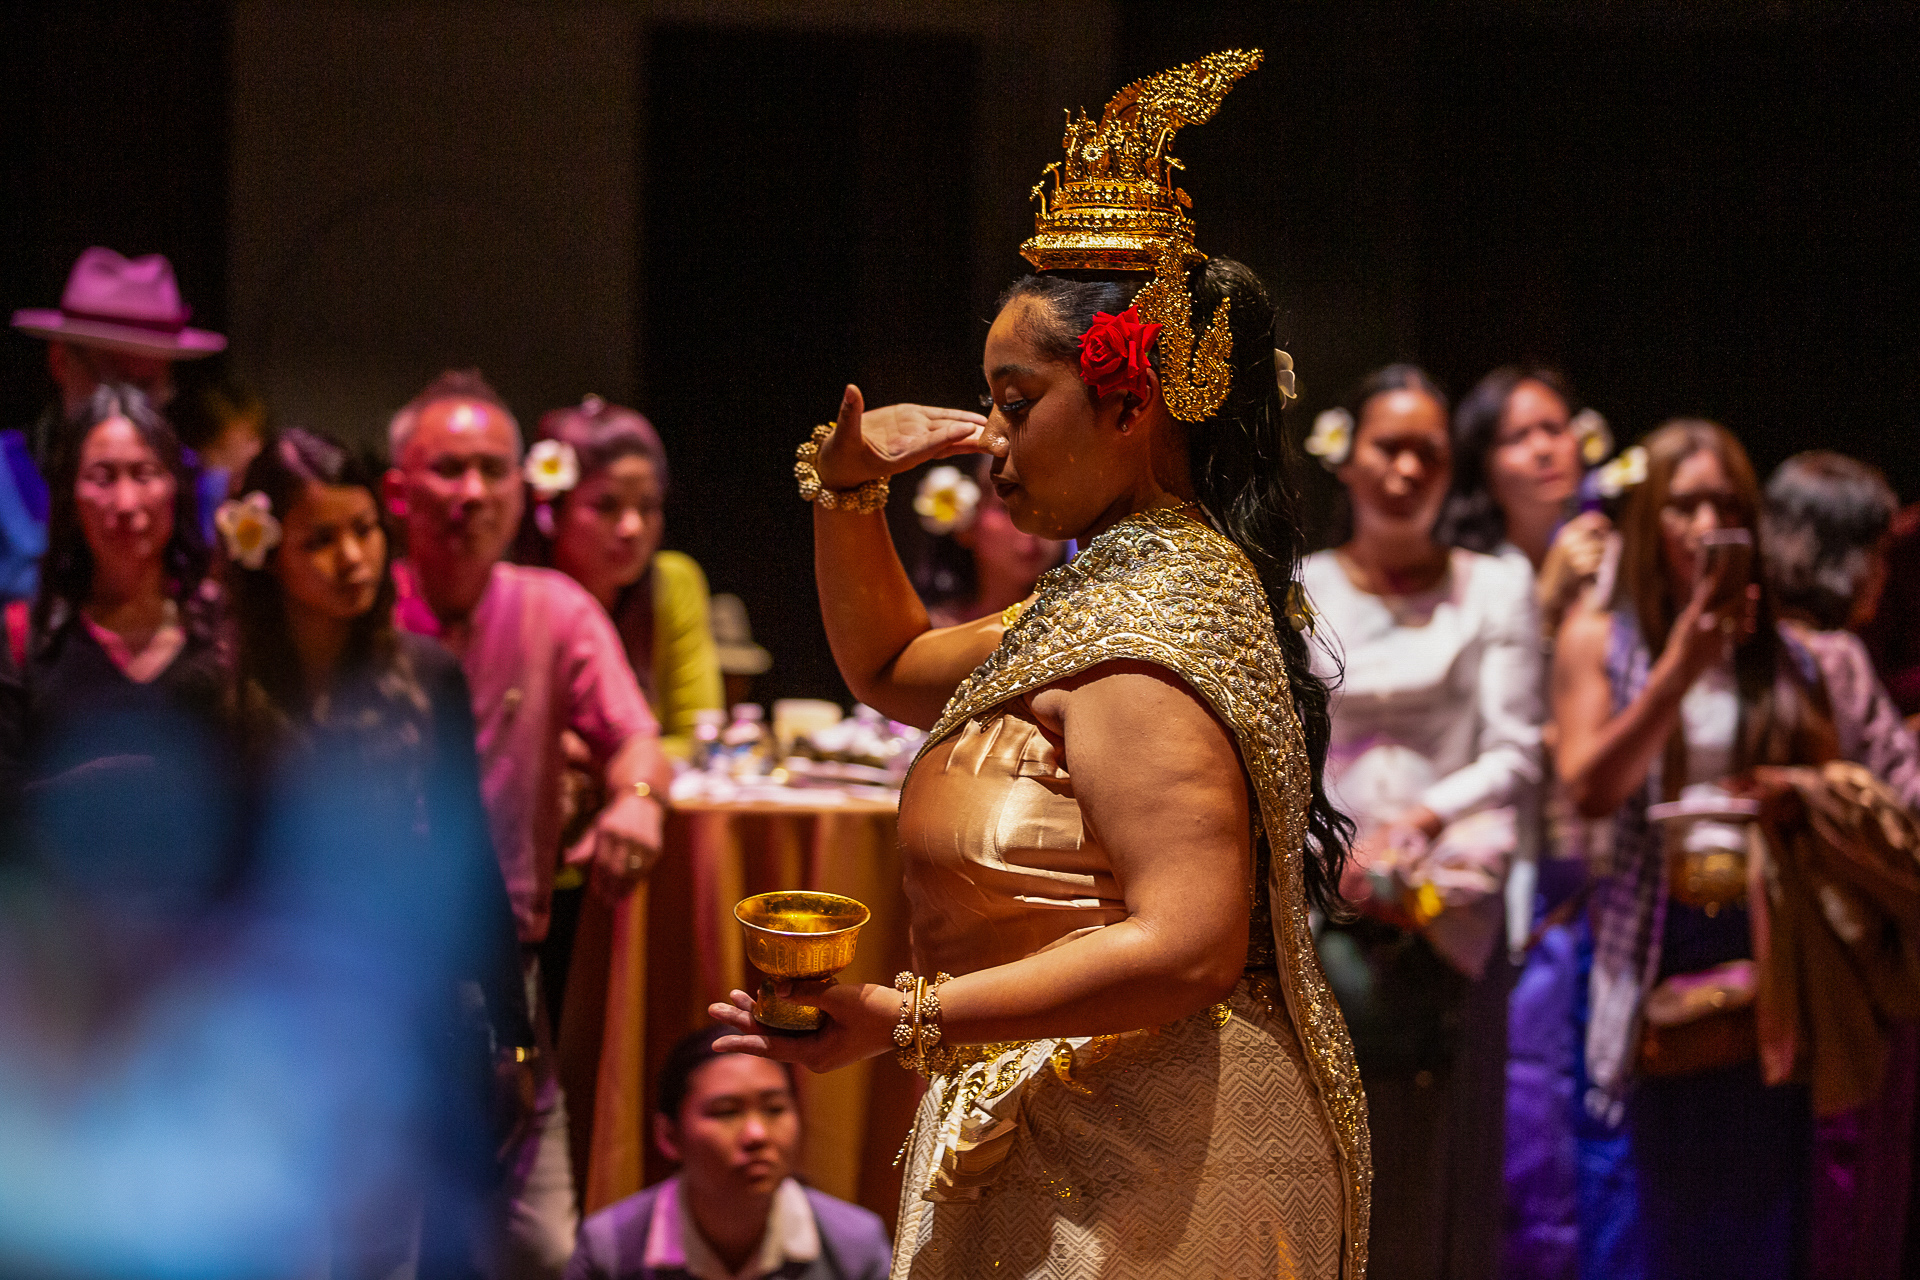 A woman in a gold dress and draped in gold adornments dances for a crowd.